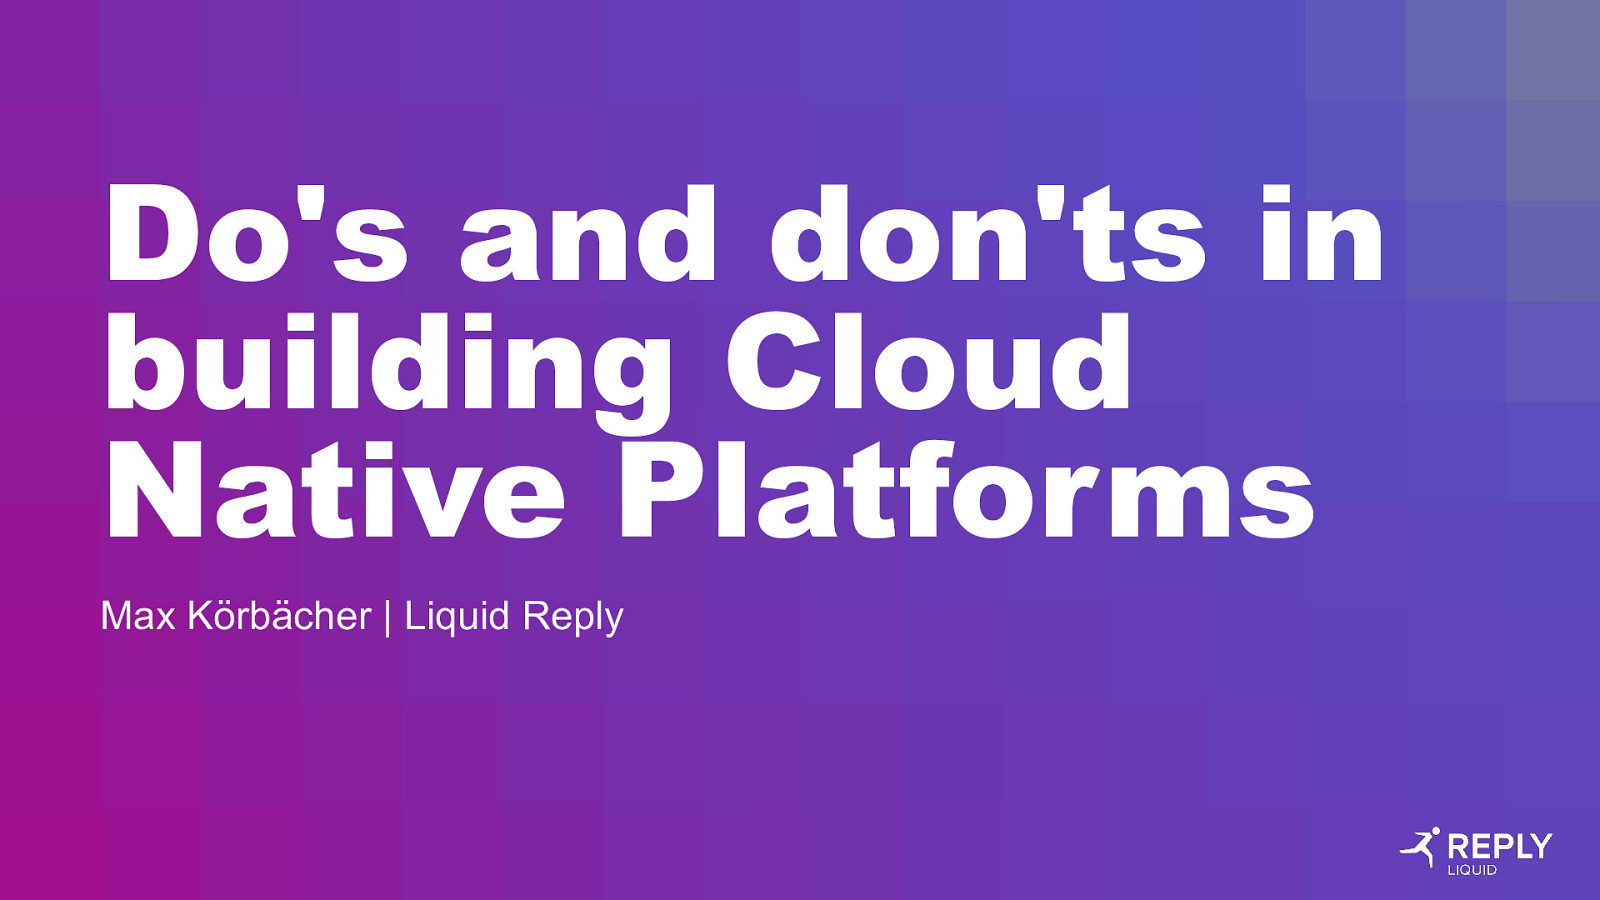 Do’s and don’ts in building Cloud Native Platforms